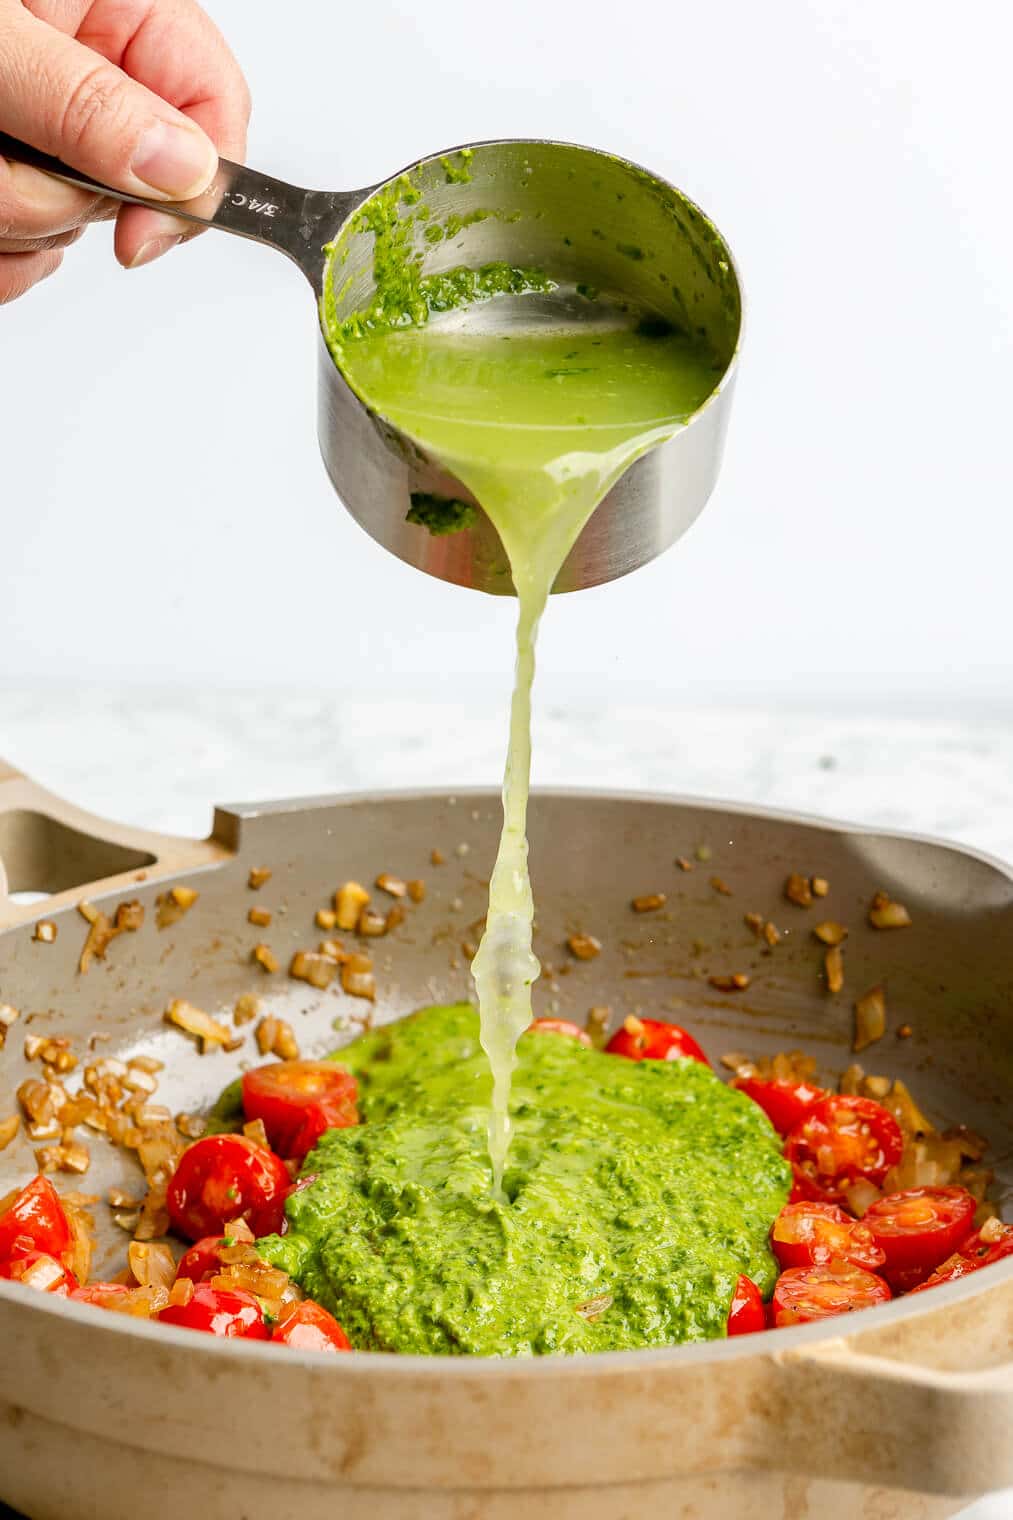 A person adding broth to a pan of sauteed onions, cherry tomatoes, and pesto sauce.